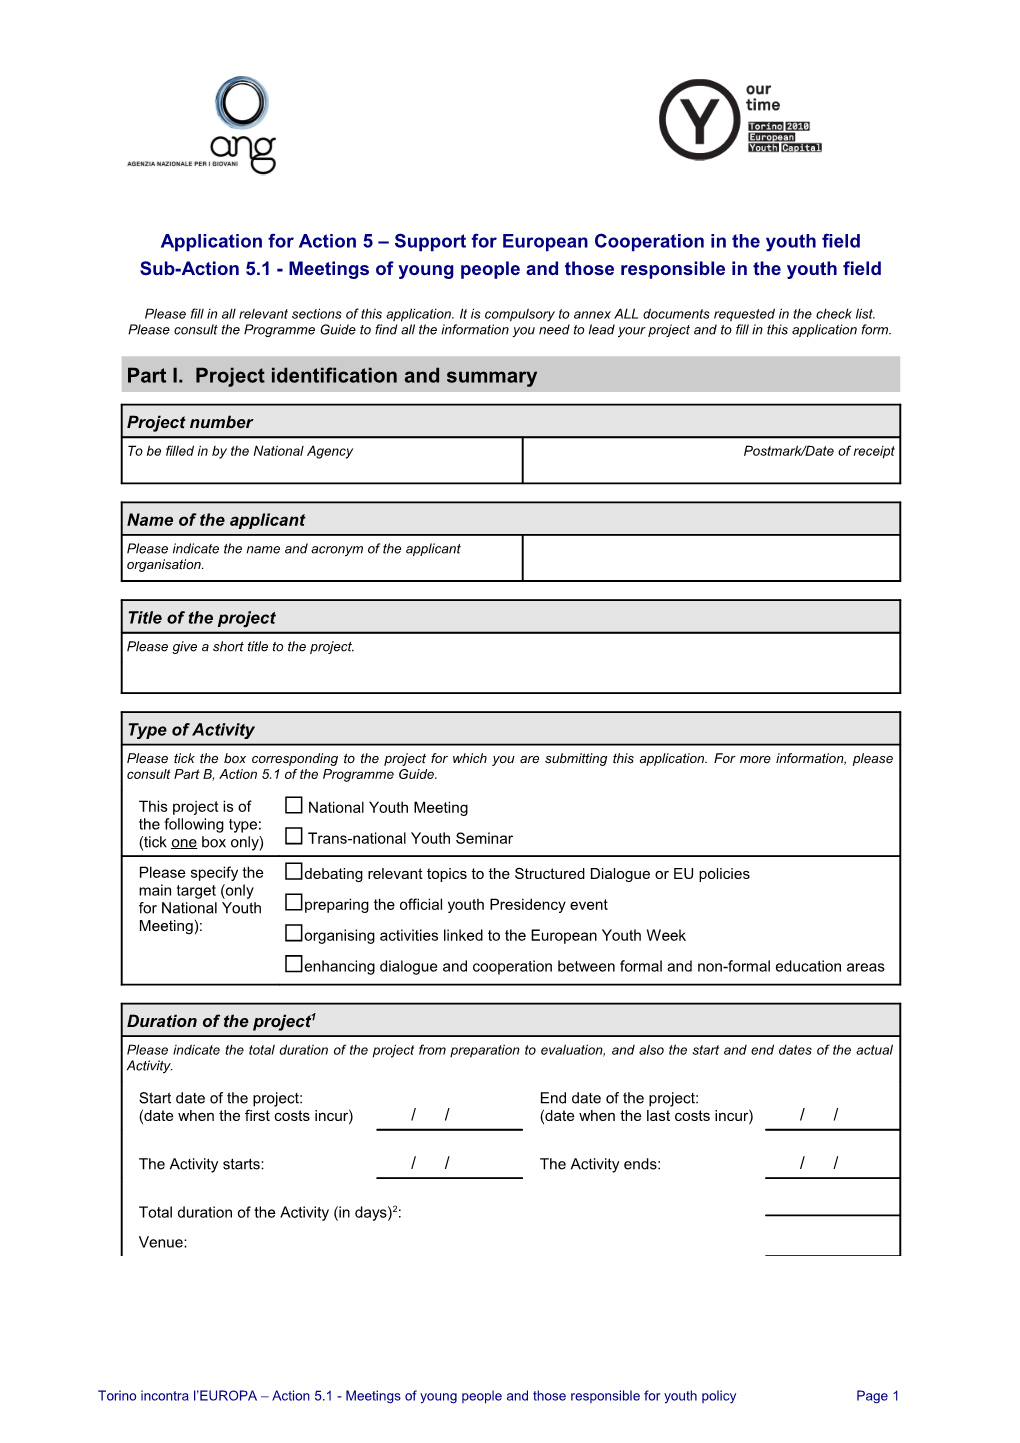 YOUTH Application Forms 2005